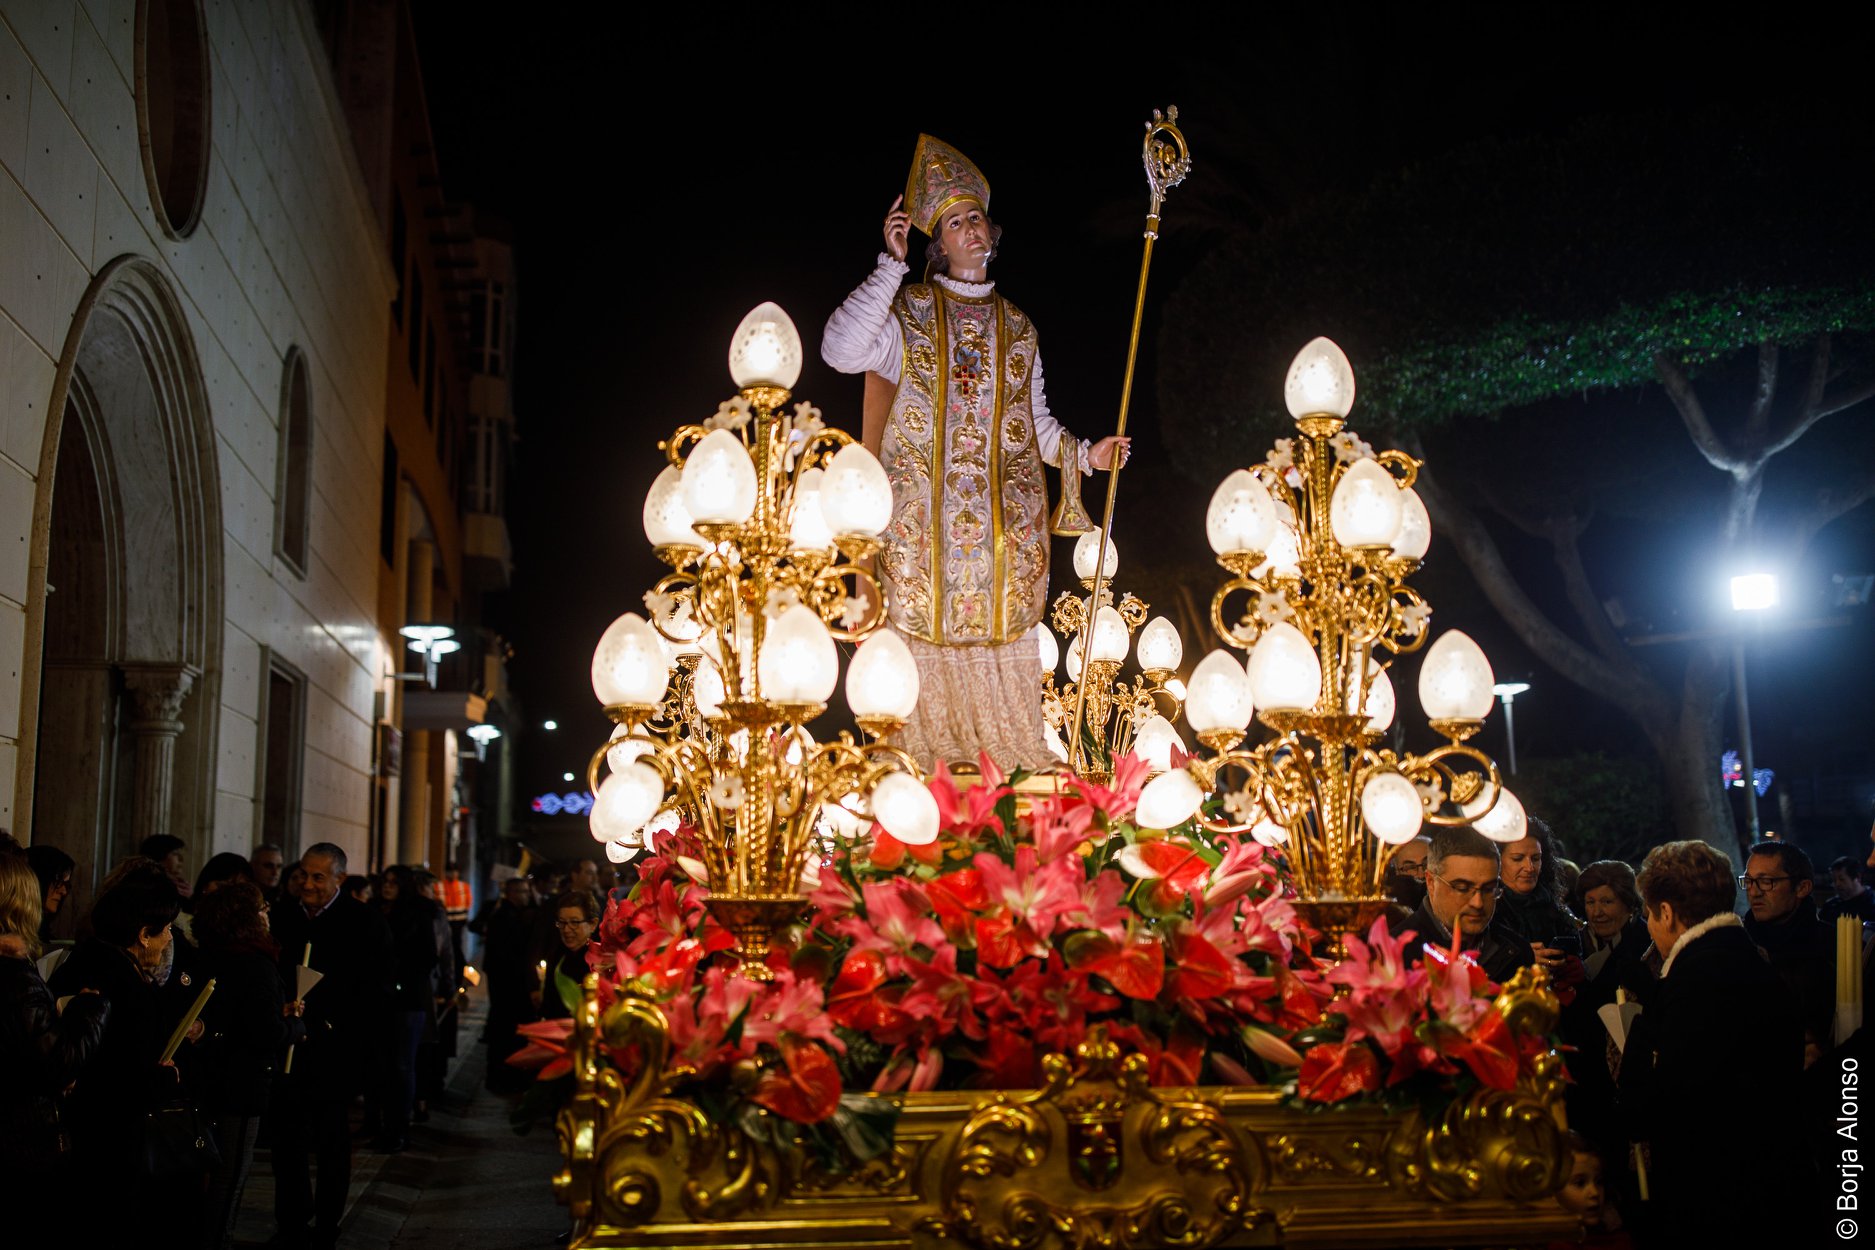 Patron Saint festival returns to town popular with expats on Spain’s Costa Blanca